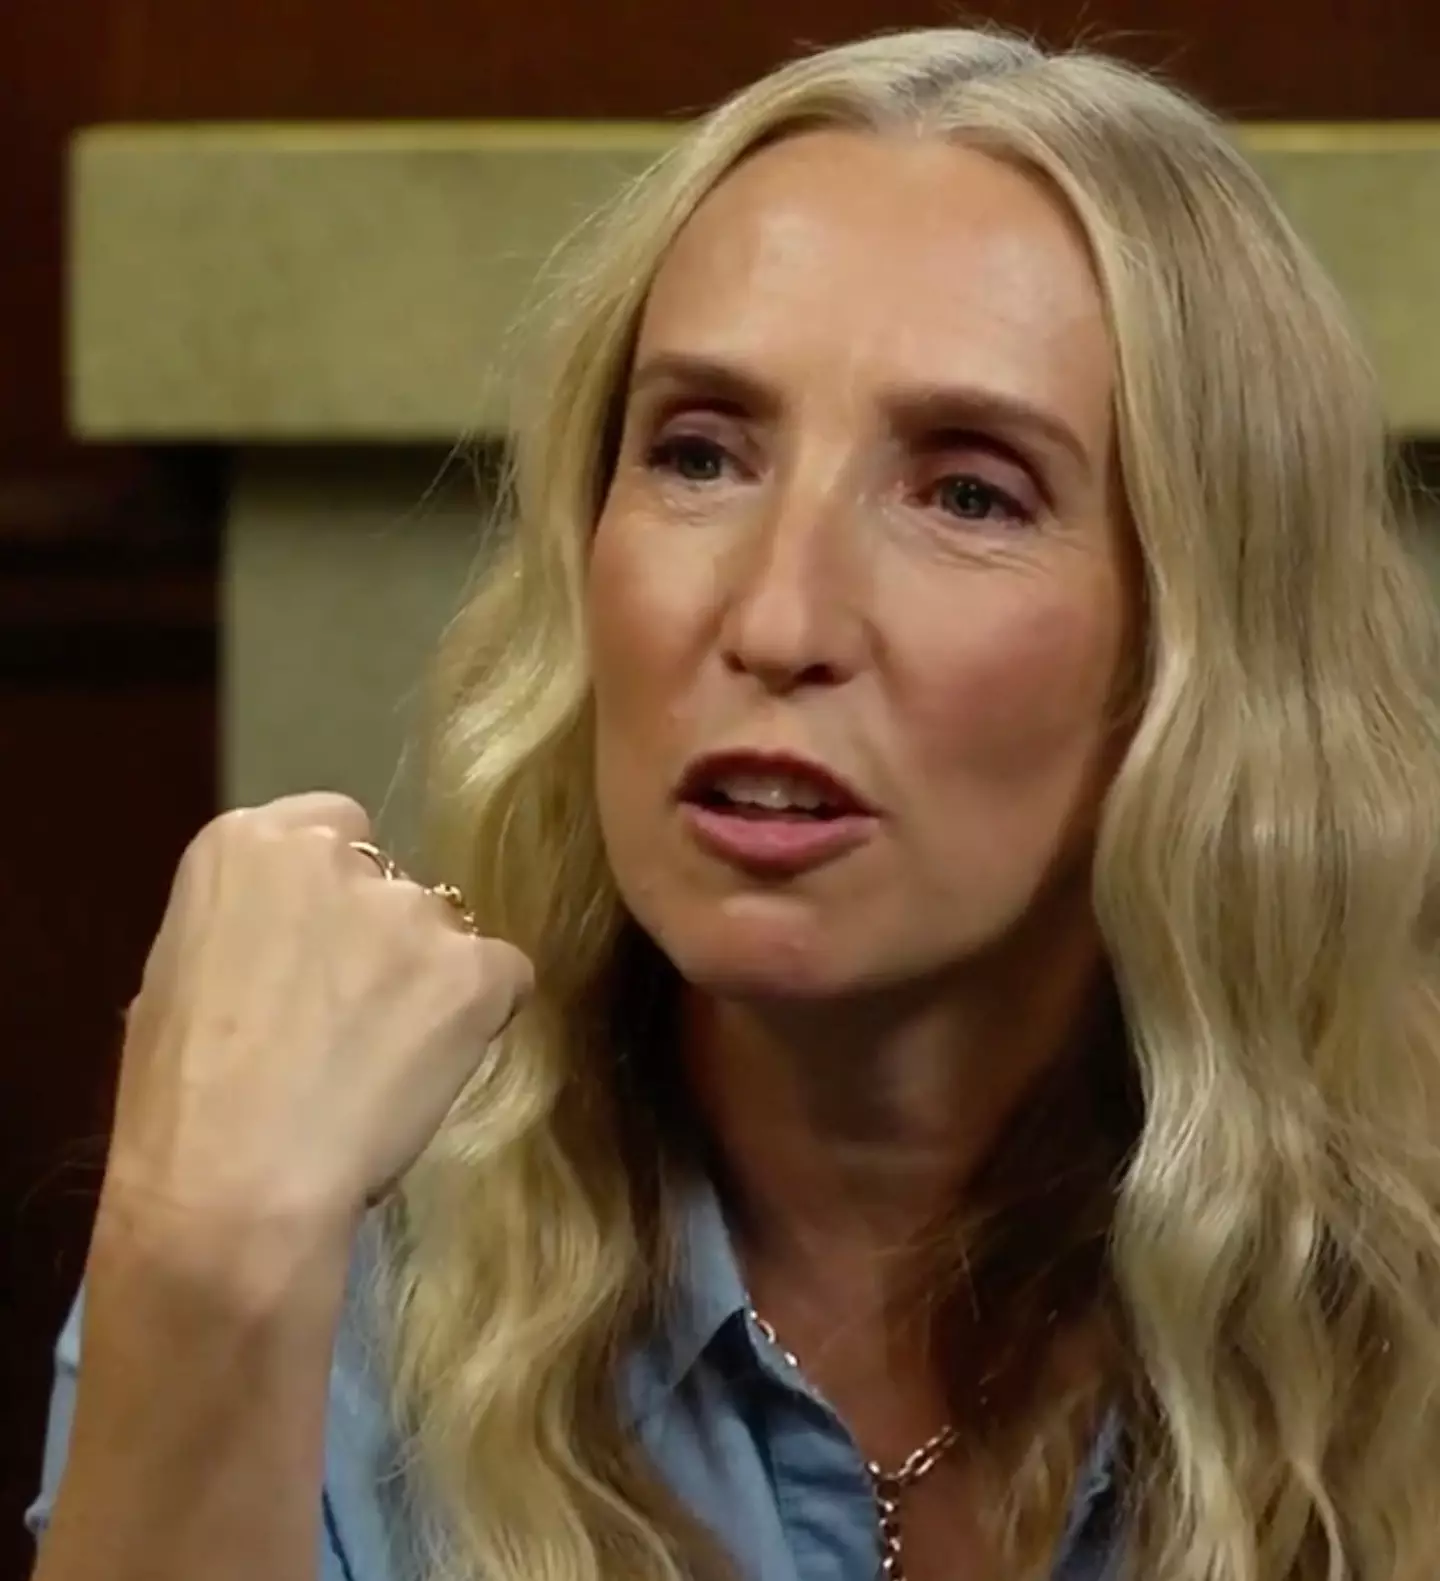 Sam Taylor-Johnson is over 20 years older than her husband, Aaron.